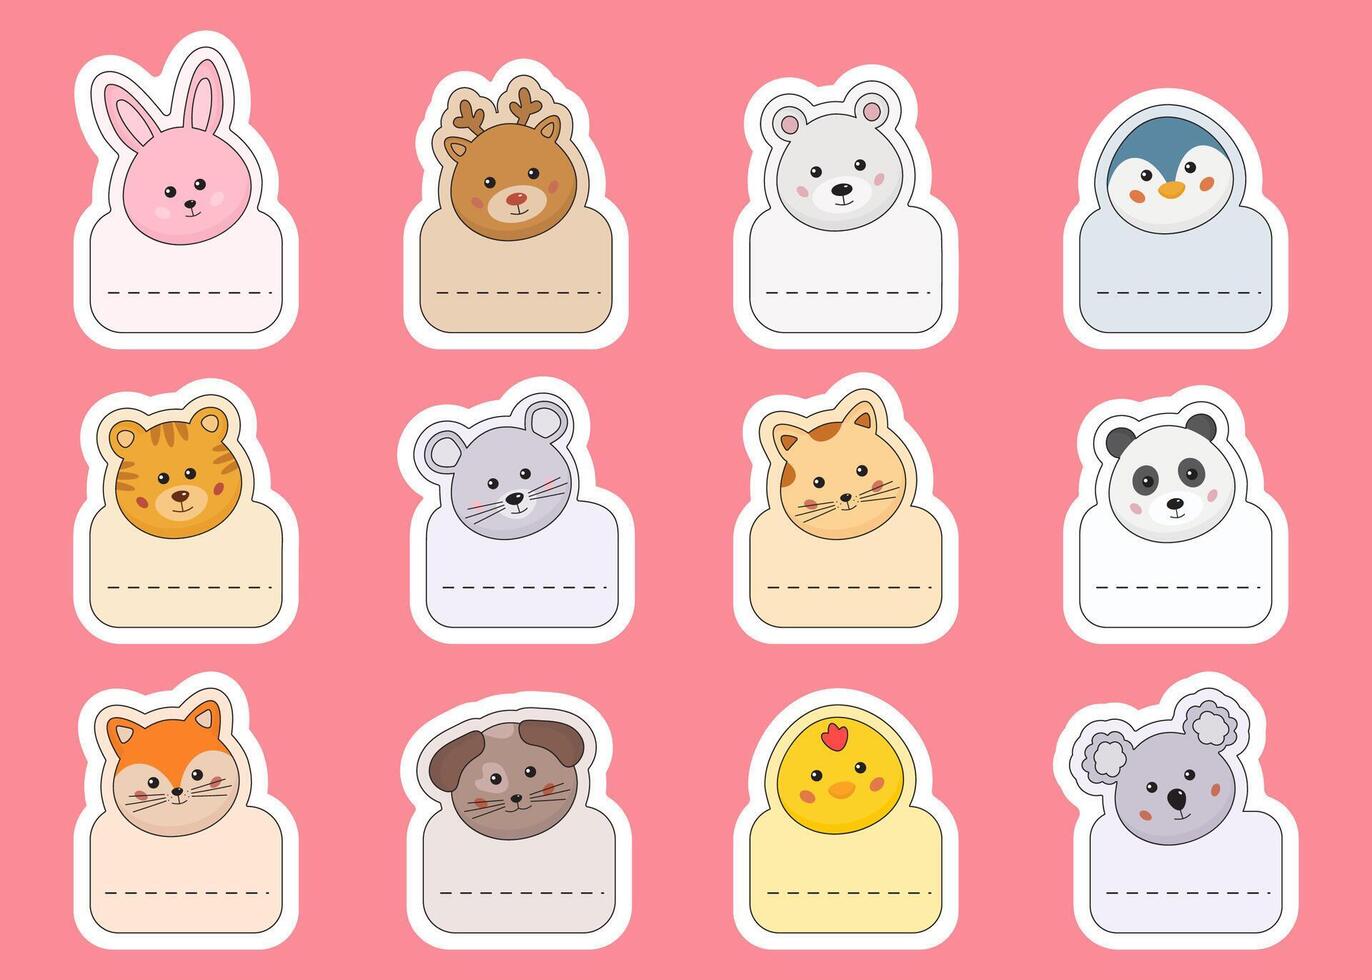 Name tags for kids. Name cards, labels, stickers for kids, toddlers, baby. Kids clothes stickers, lunchbox tag with cute animals. Animals shaped notepads, classroom labels, markers, school stationery. vector